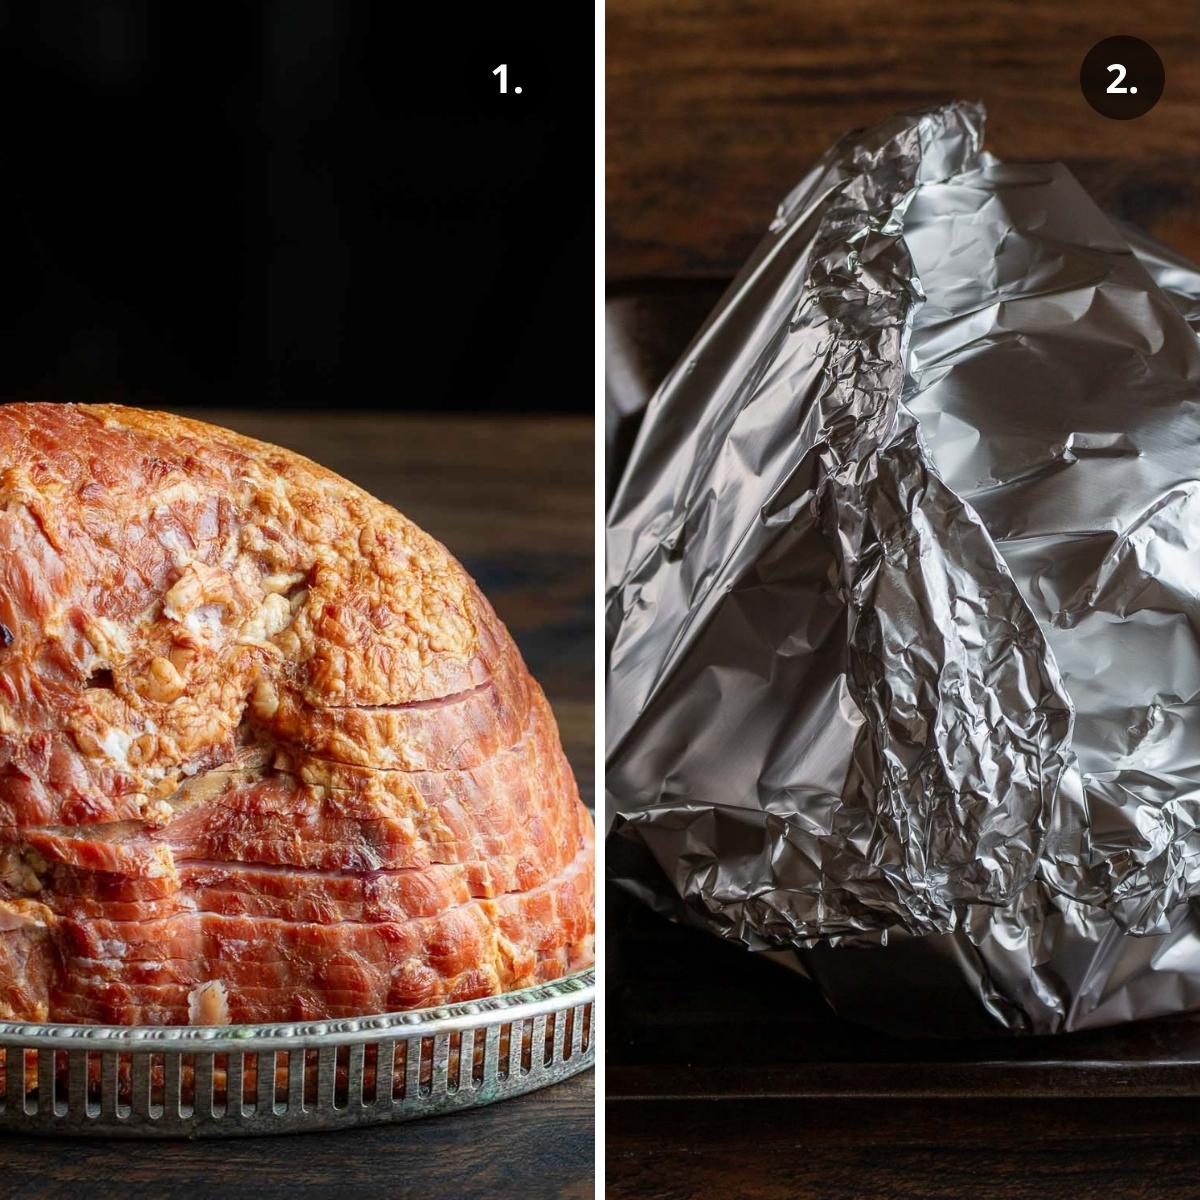 spiral ham and also one spiral ham wrapped in aluminum foil.